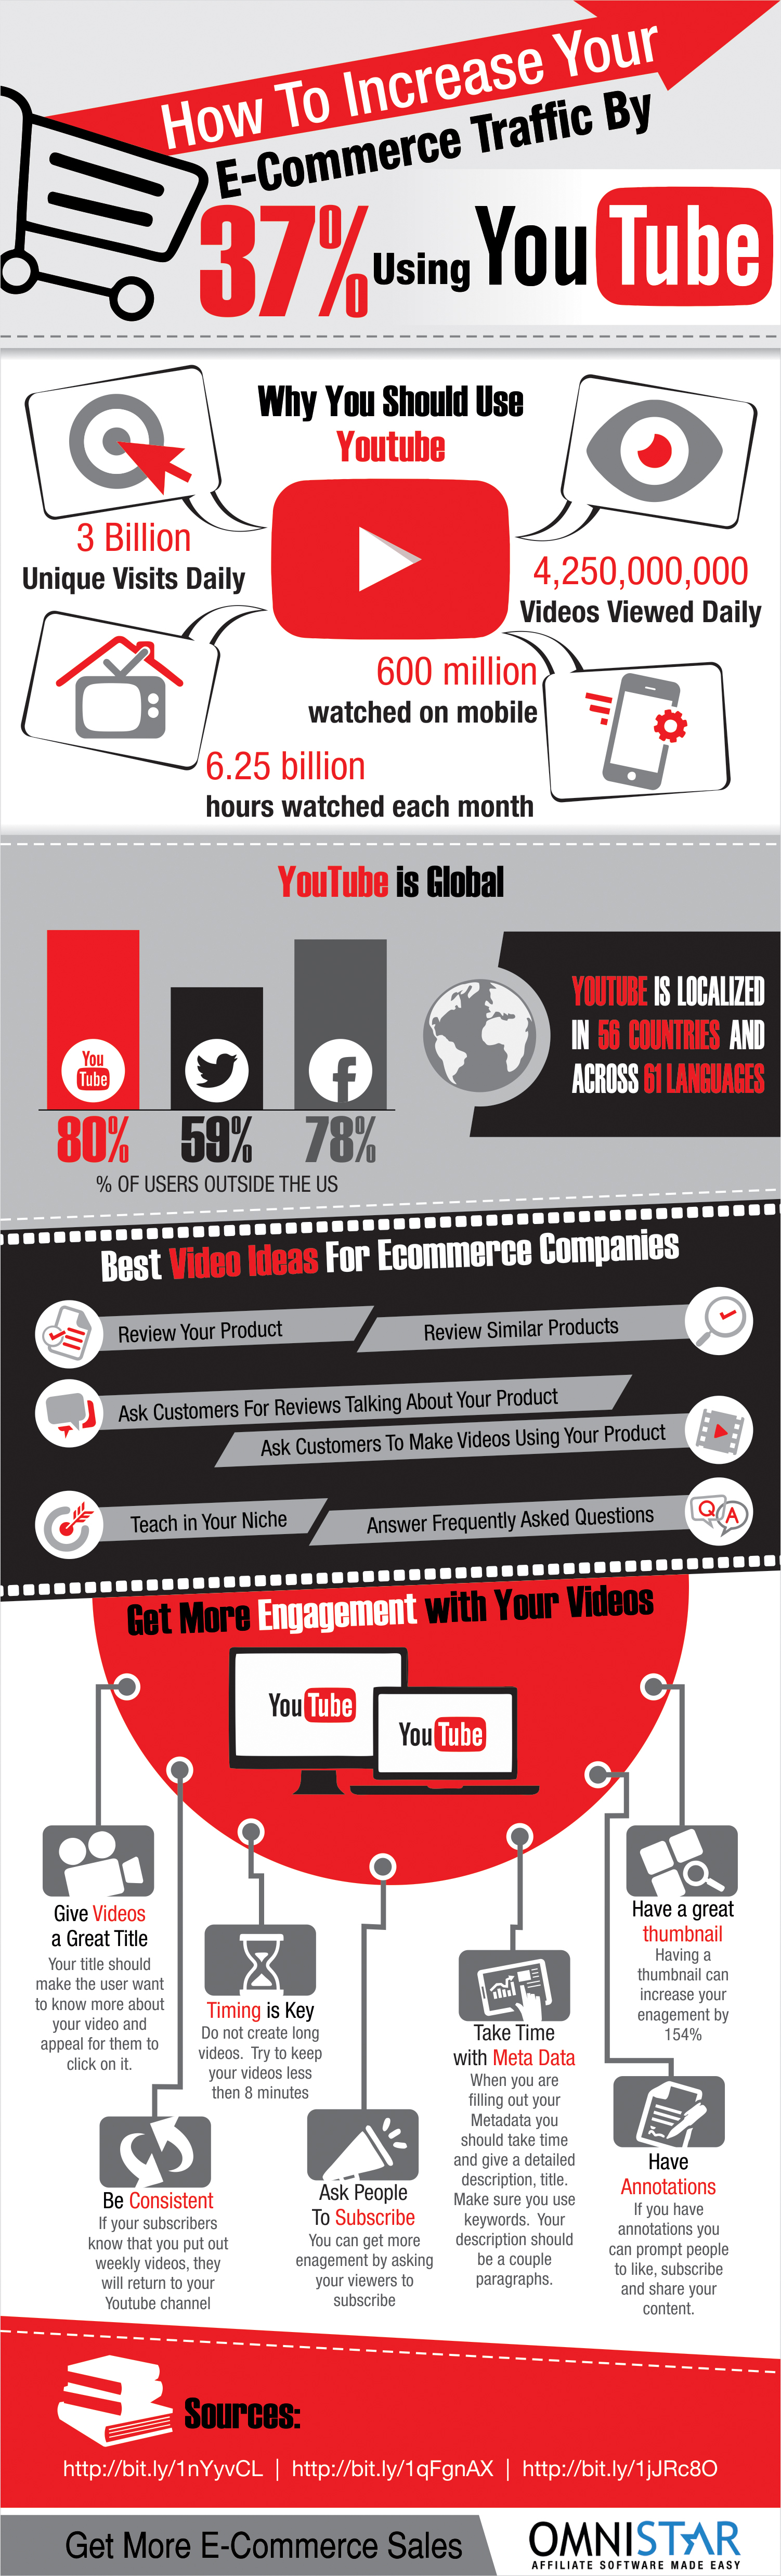 Infographic: How to Increase Your eCommerce Traffic by 37% Using YouTube